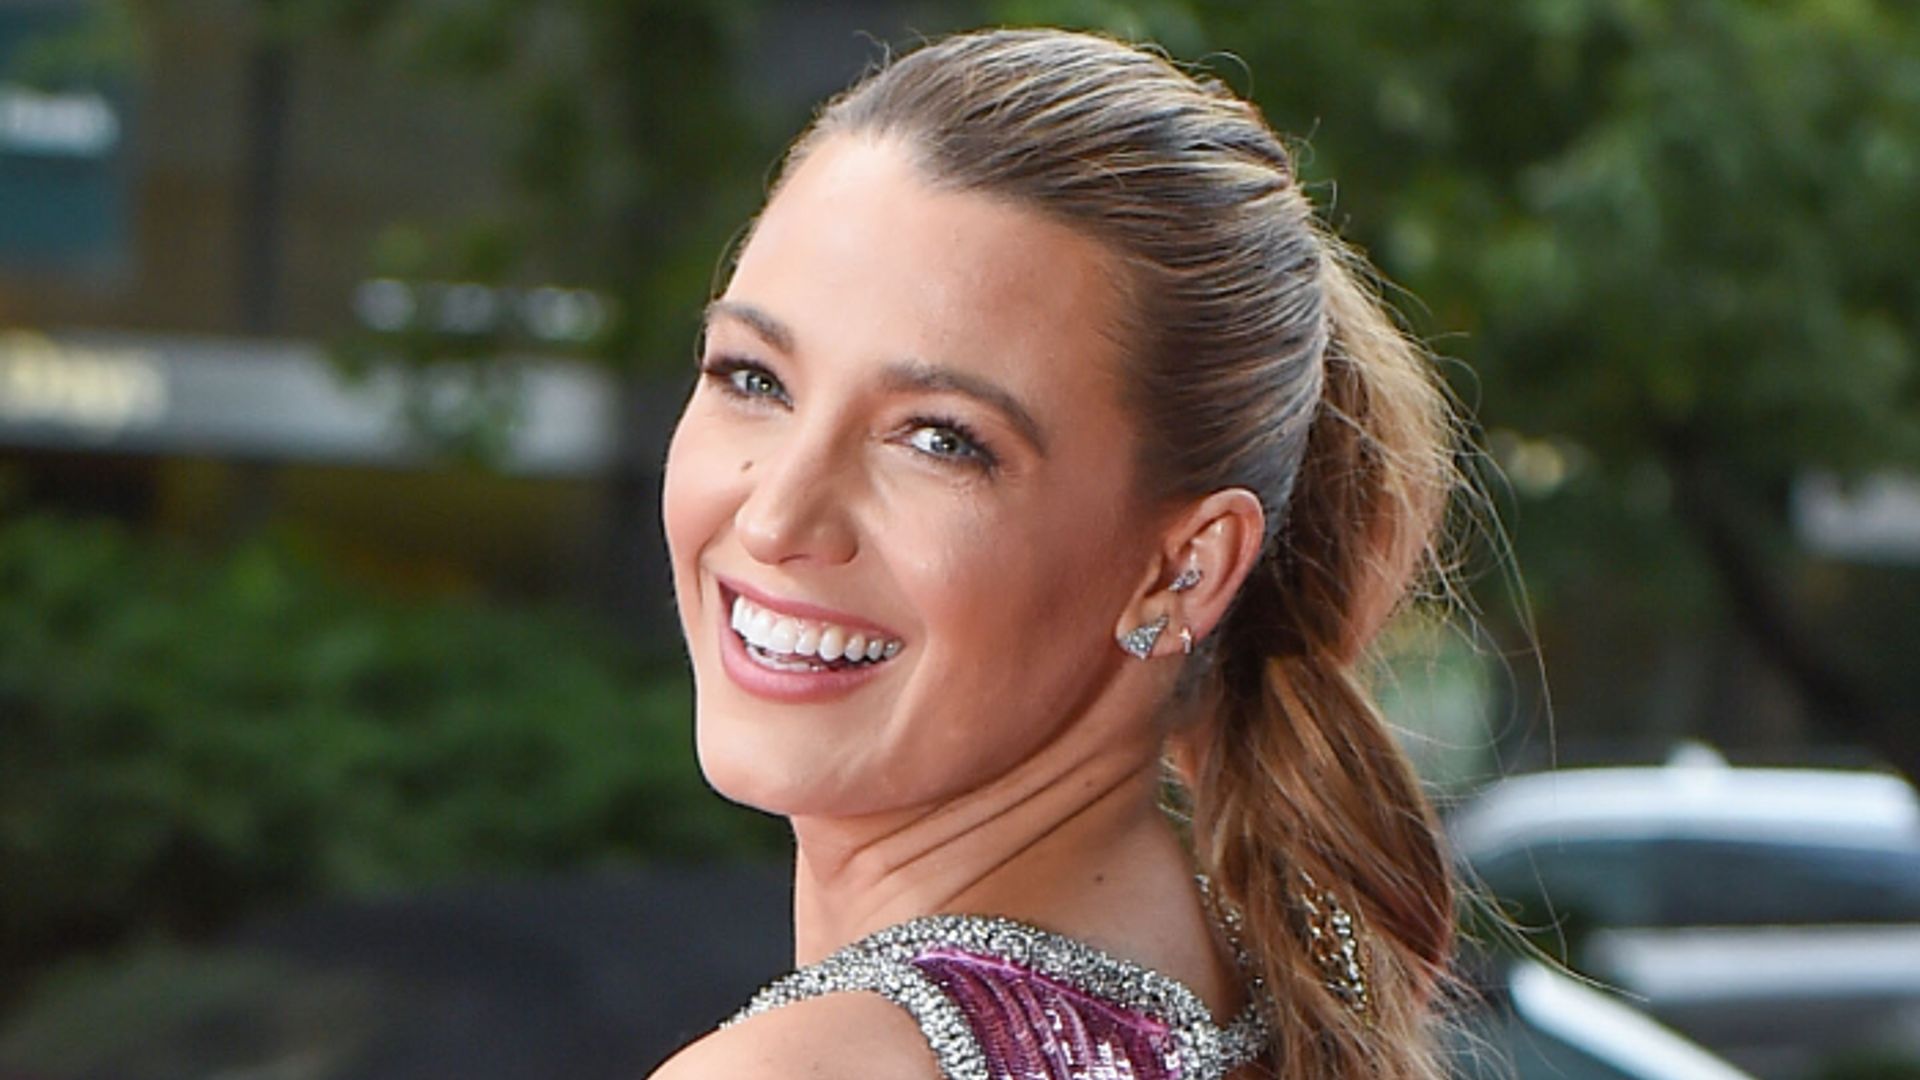 Blake Lively Showcases Incredible Abs In Latest Swimsuit Photo And Fans